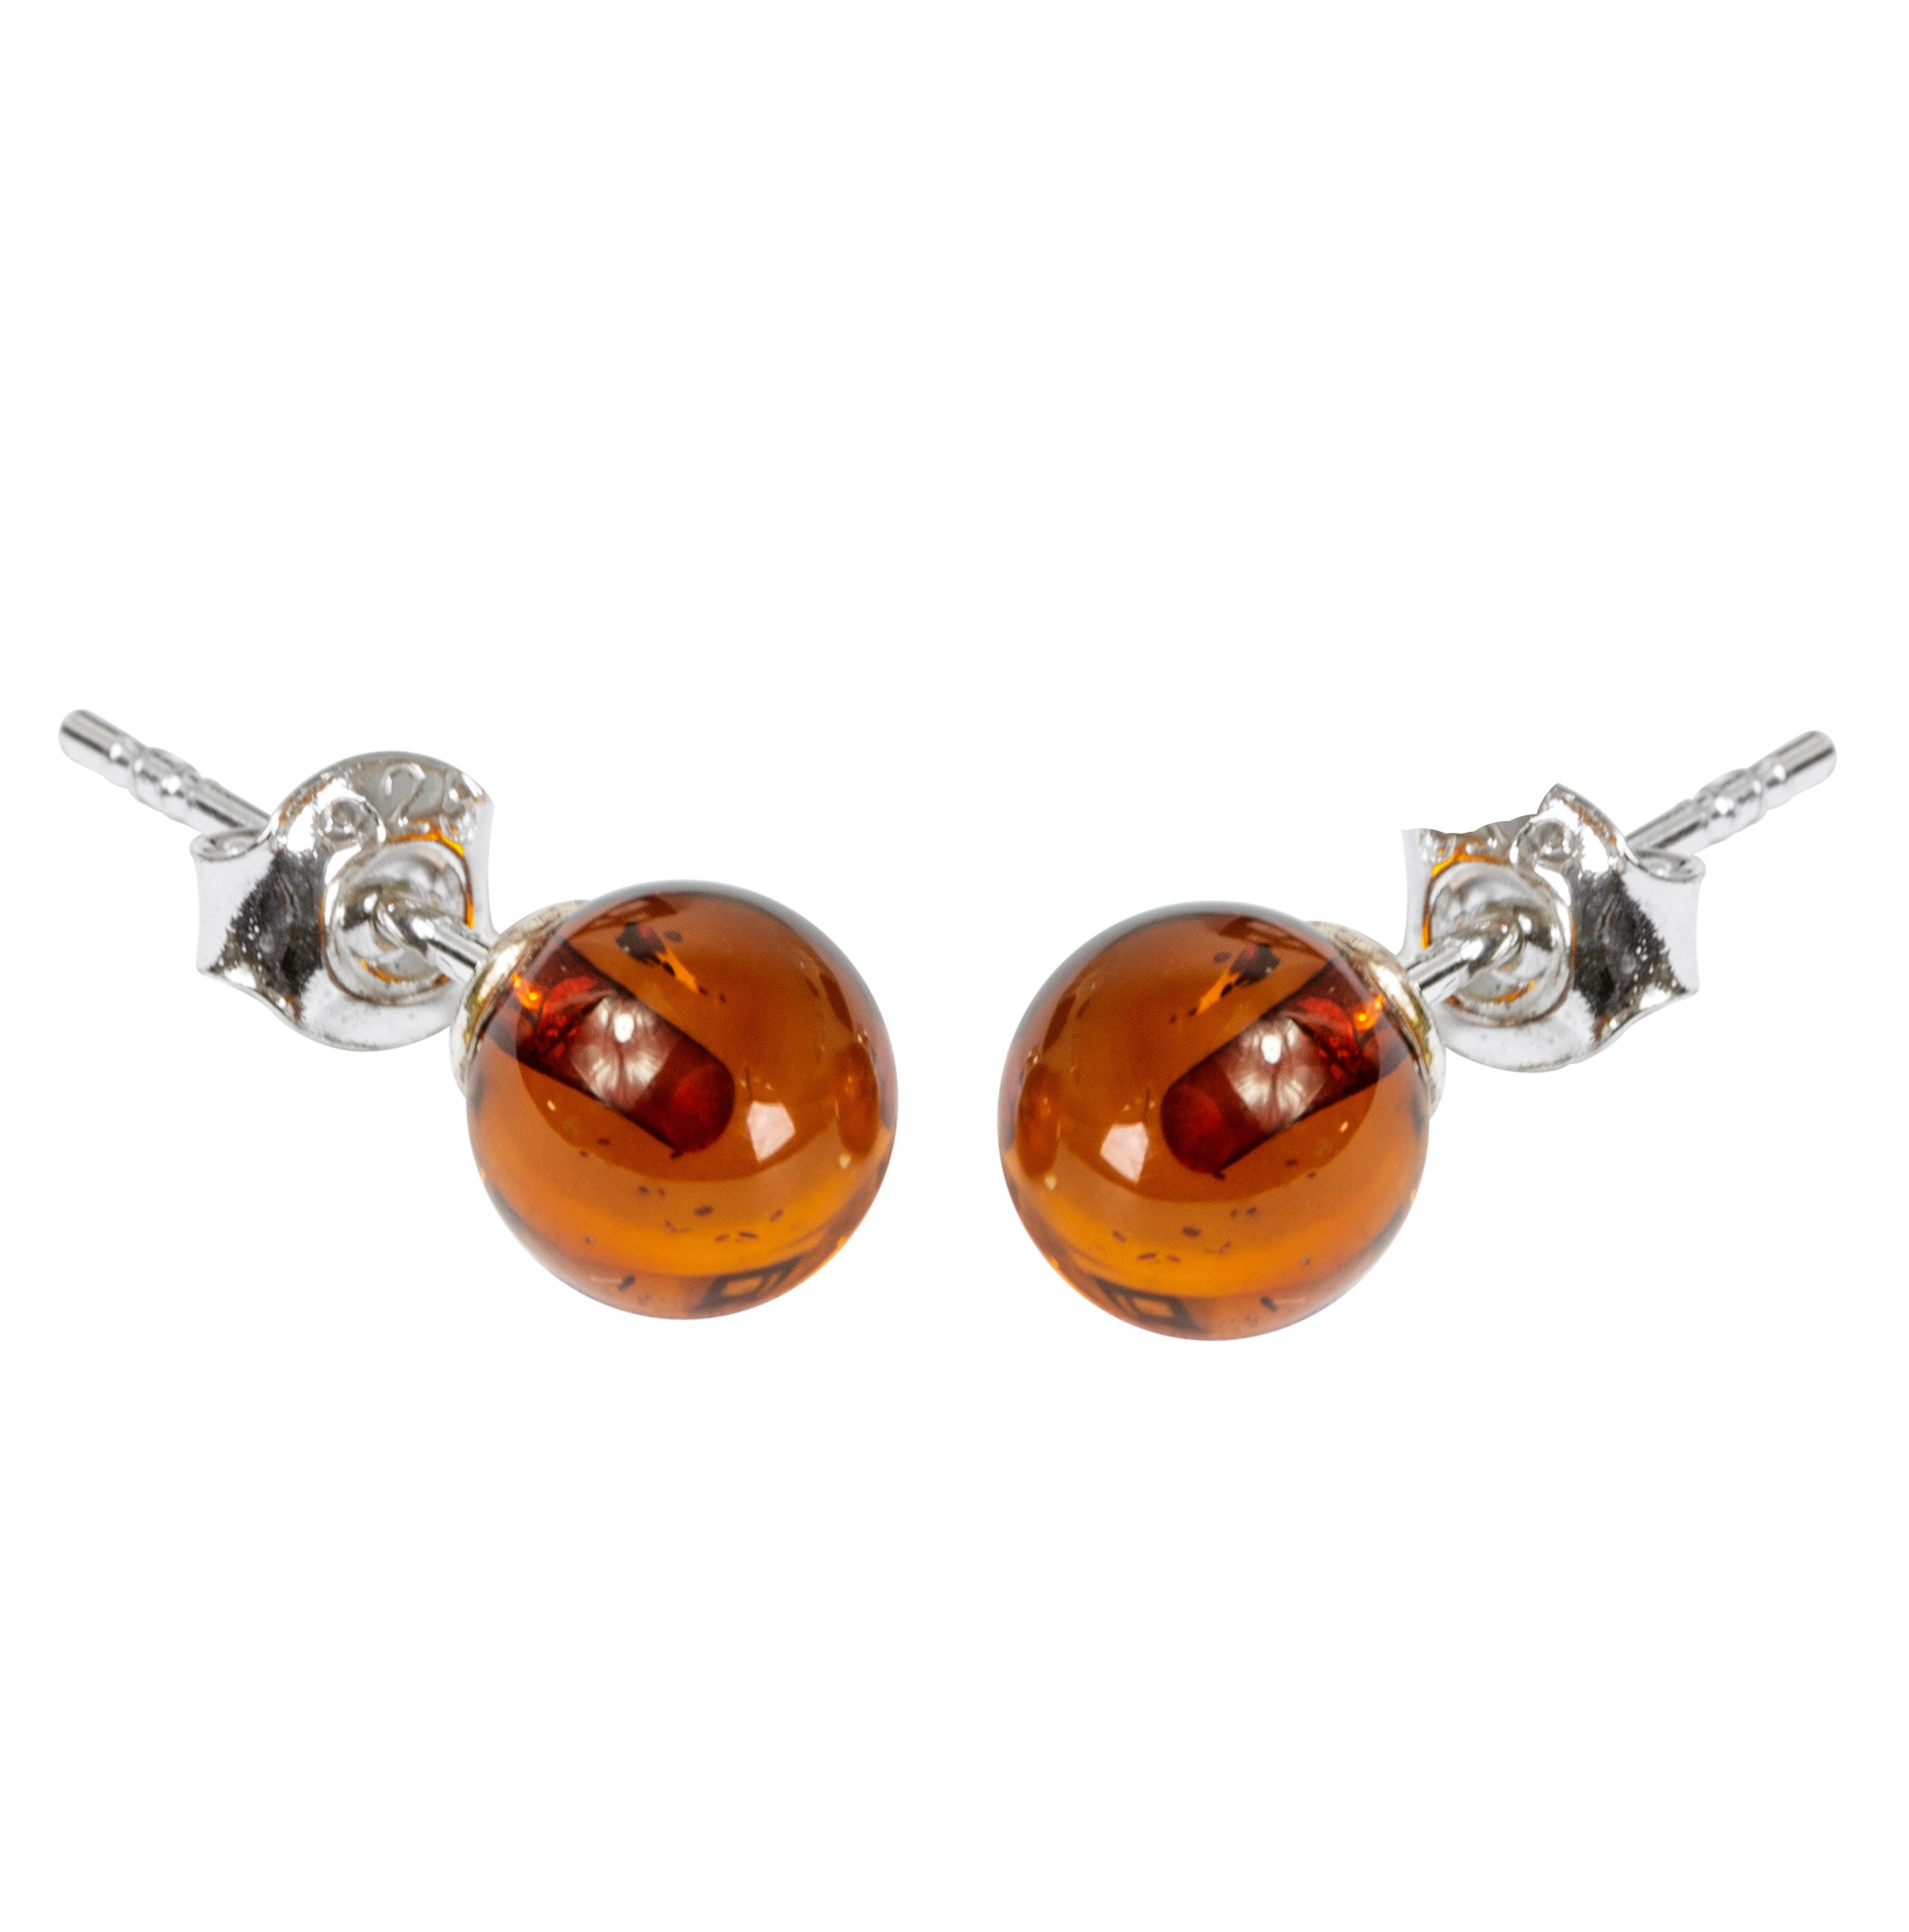 NATURAL BALTIC AMBER STERLING SILVER 925 Earrings Stud Jewellery Certified & Box 